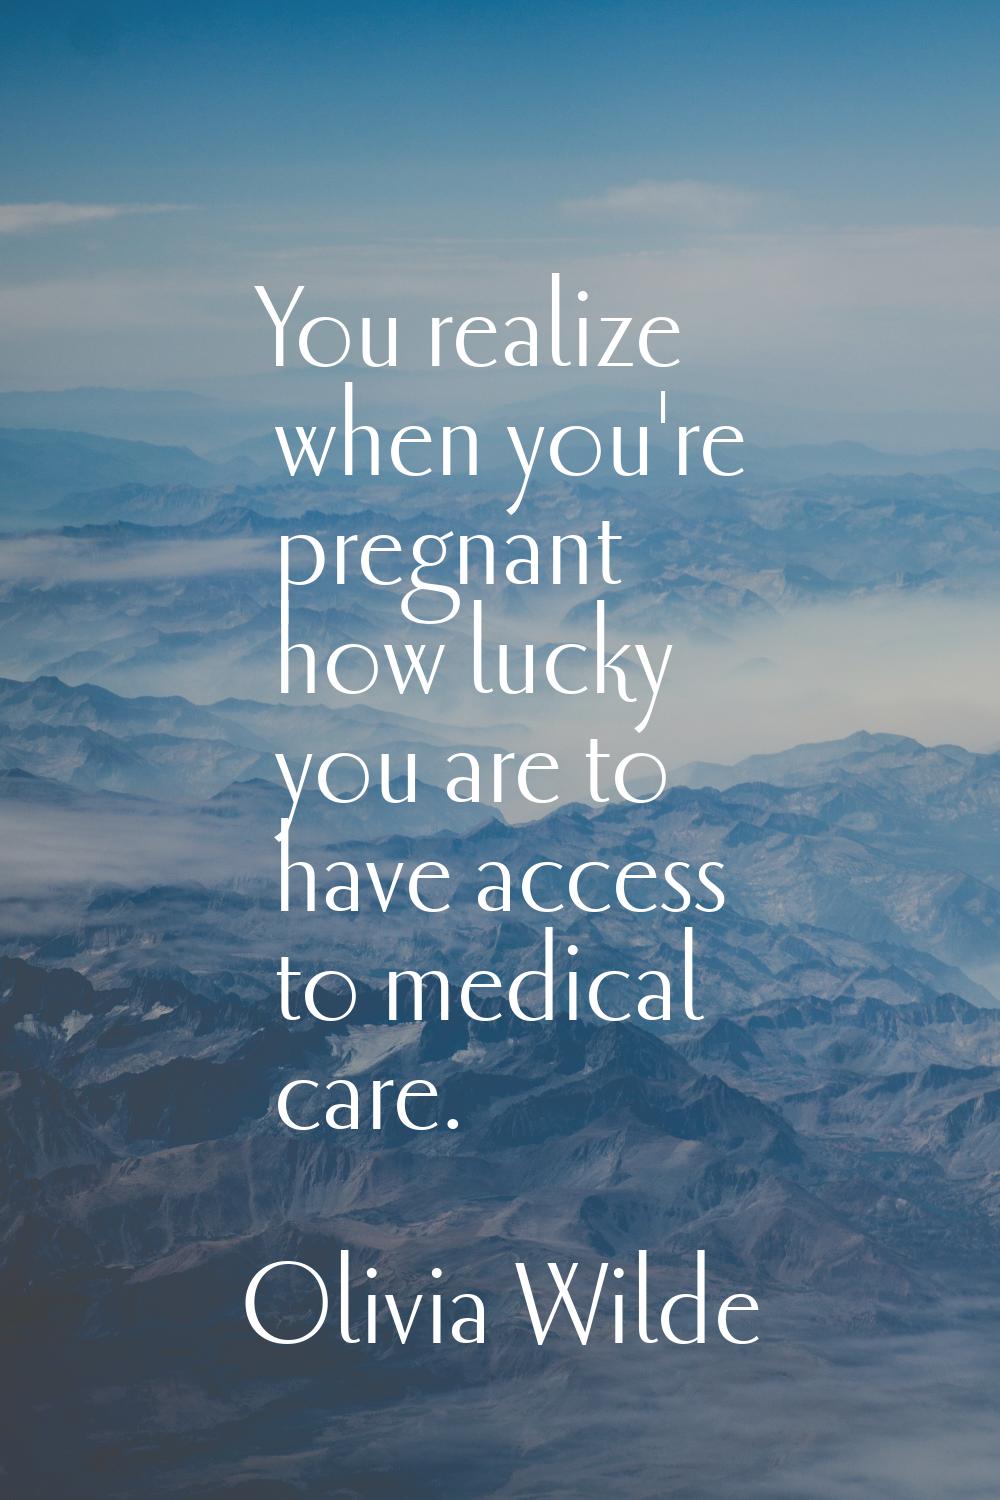 You realize when you're pregnant how lucky you are to have access to medical care.